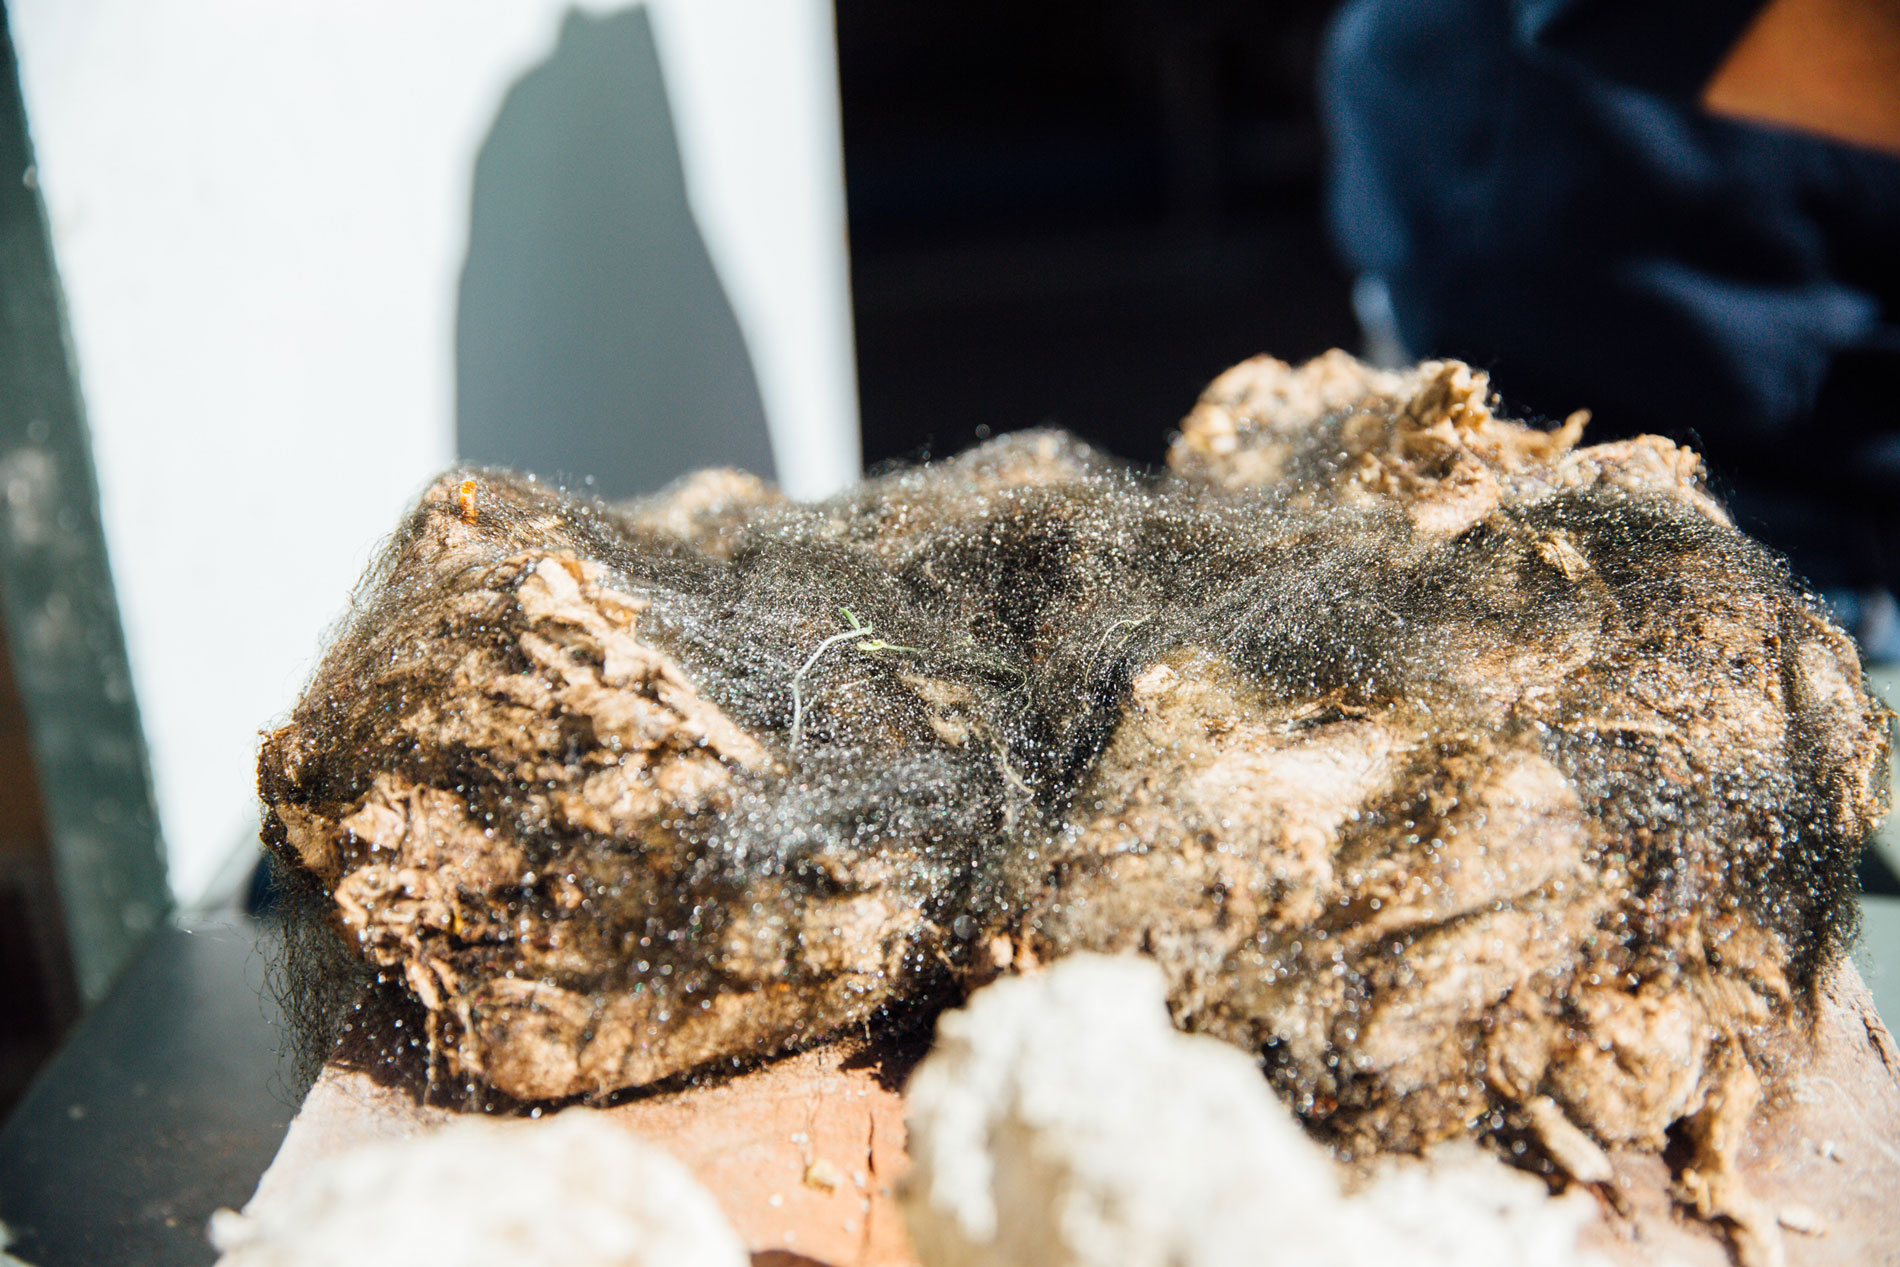 Everything you never wanted to know about Fatbergs